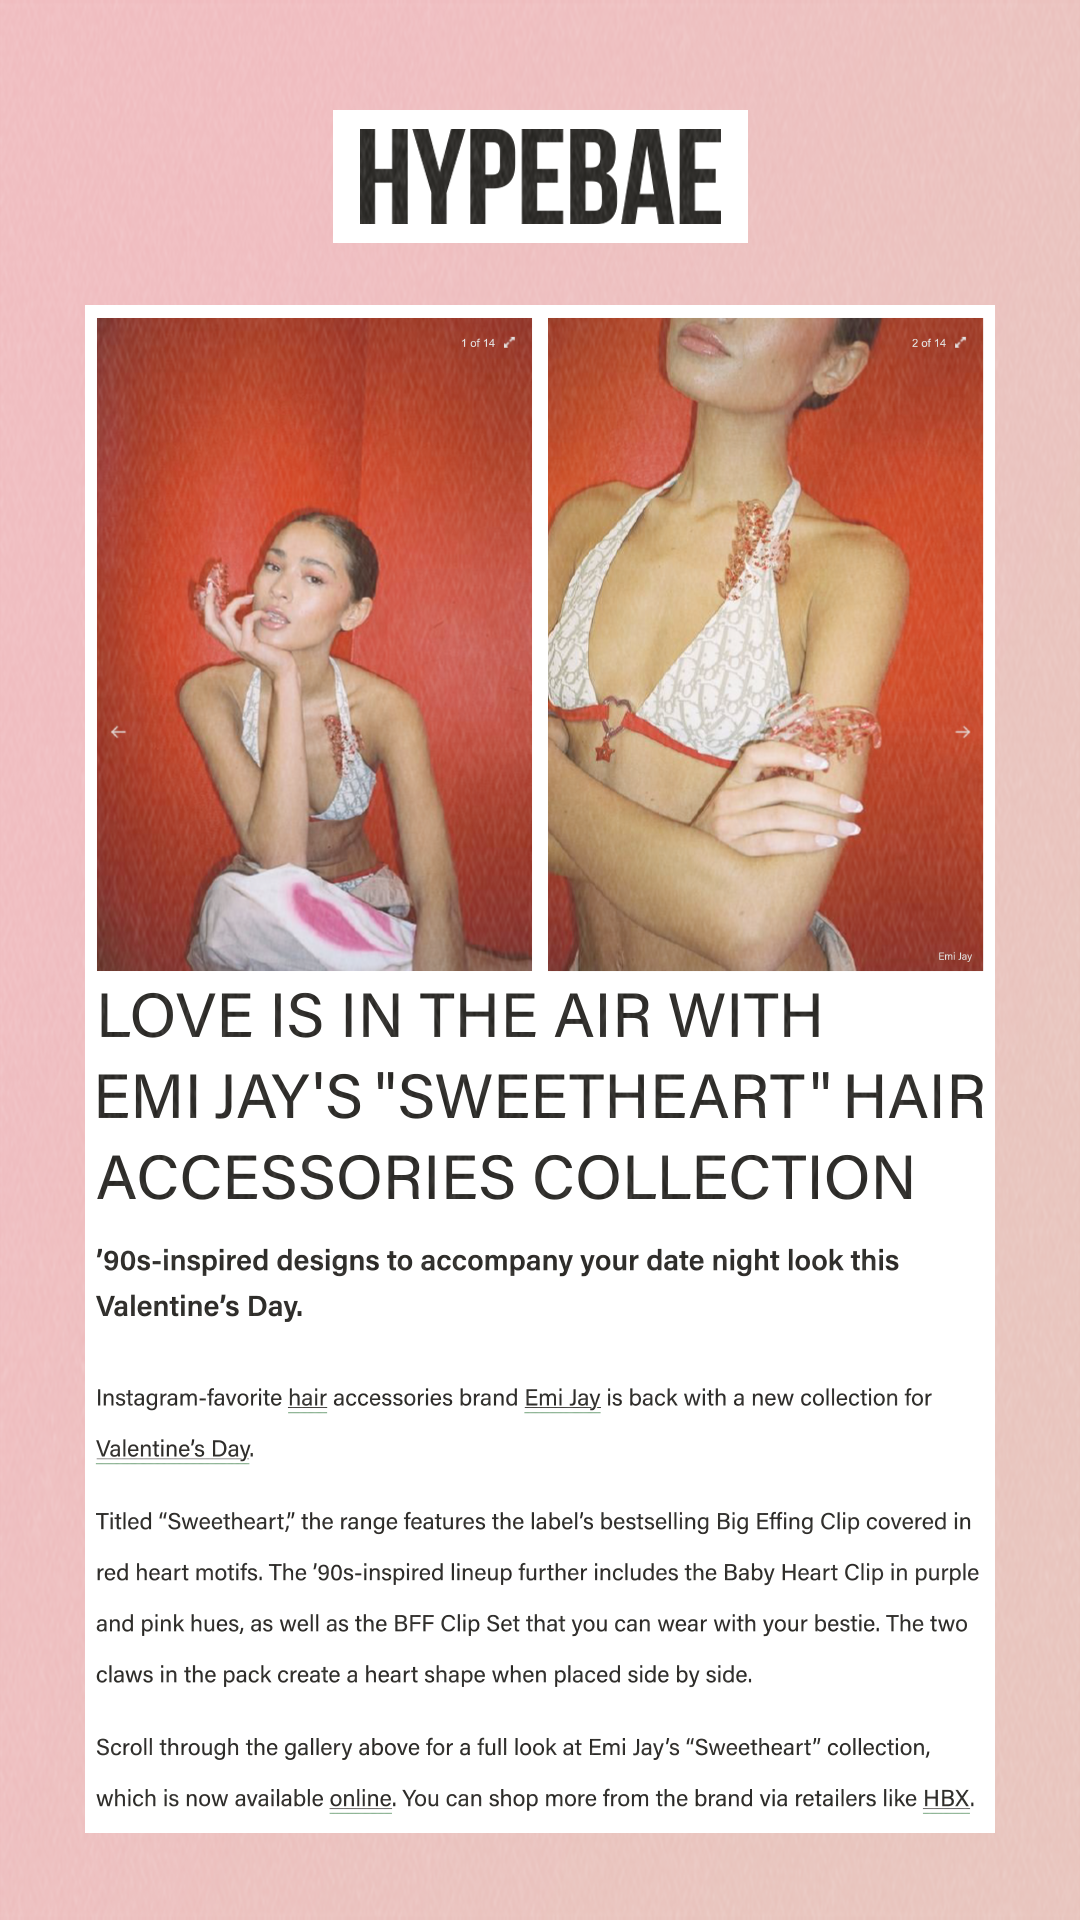 HypeBae. Love Is in the Air With Emi Jay's Sweetheart Hair Accessories Collection ’90s-inspired designs to accompany your date night look this Valentine’s Day. Instagram-favorite hair accessories brand Emi Jay is back with a new collection for Valentine’s Day. Titled Sweetheart, the range features the label’s bestselling Big Effing Clip covered in red heart motifs. The ’90s-inspired lineup further includes the Baby Heart Clip in purple and pink hues, as well as the BFF Clip Set that you can wear with your bestie. The two claws in the pack create a heart shape when placed side by side. Scroll through the gallery above for a full look at Emi Jay’s Sweetheart collection, which is now available online. You can shop more from the brand via retailers like HBX.